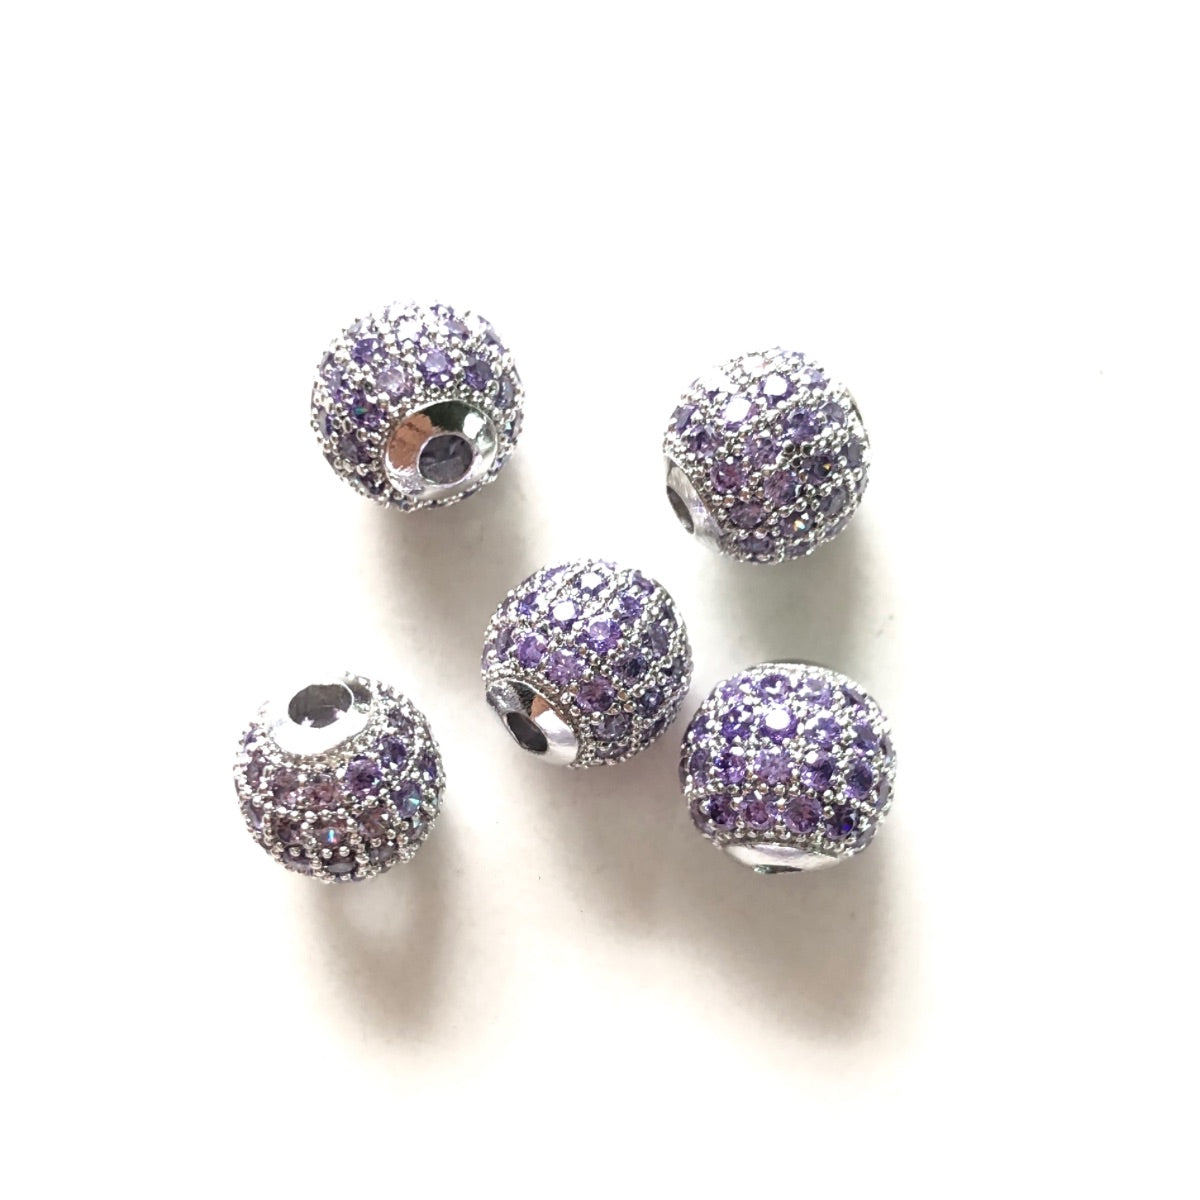 10pcs/lot 6mm, 8mm Colorful CZ Paved Ball Spacers Silver Purple CZ Paved Spacers 6mm Beads 8mm Beads Ball Beads Colorful Zirconia New Spacers Arrivals Charms Beads Beyond